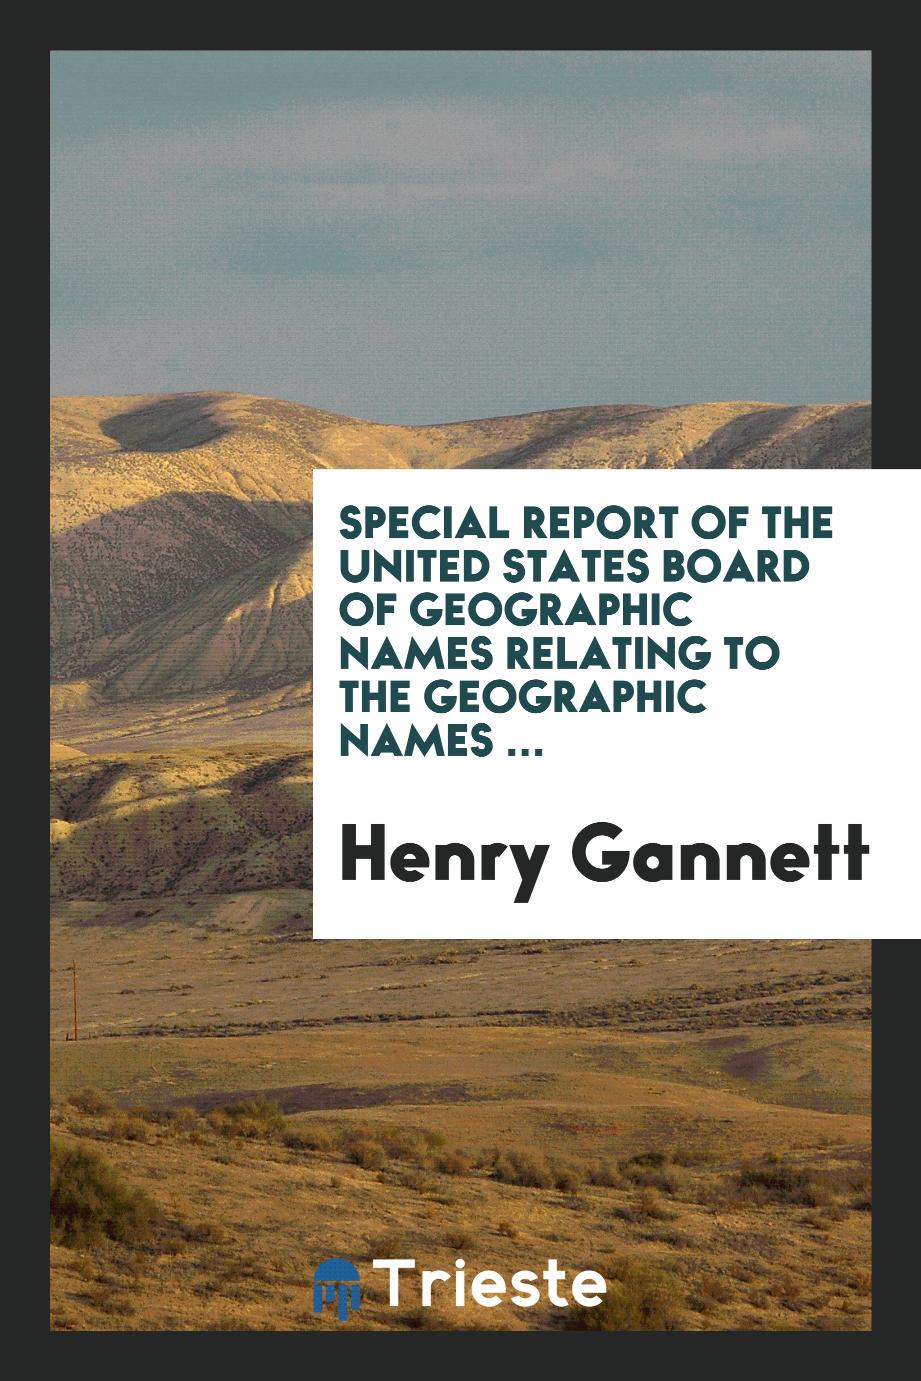 Special Report of the United States Board of Geographic Names Relating to the Geographic Names ...